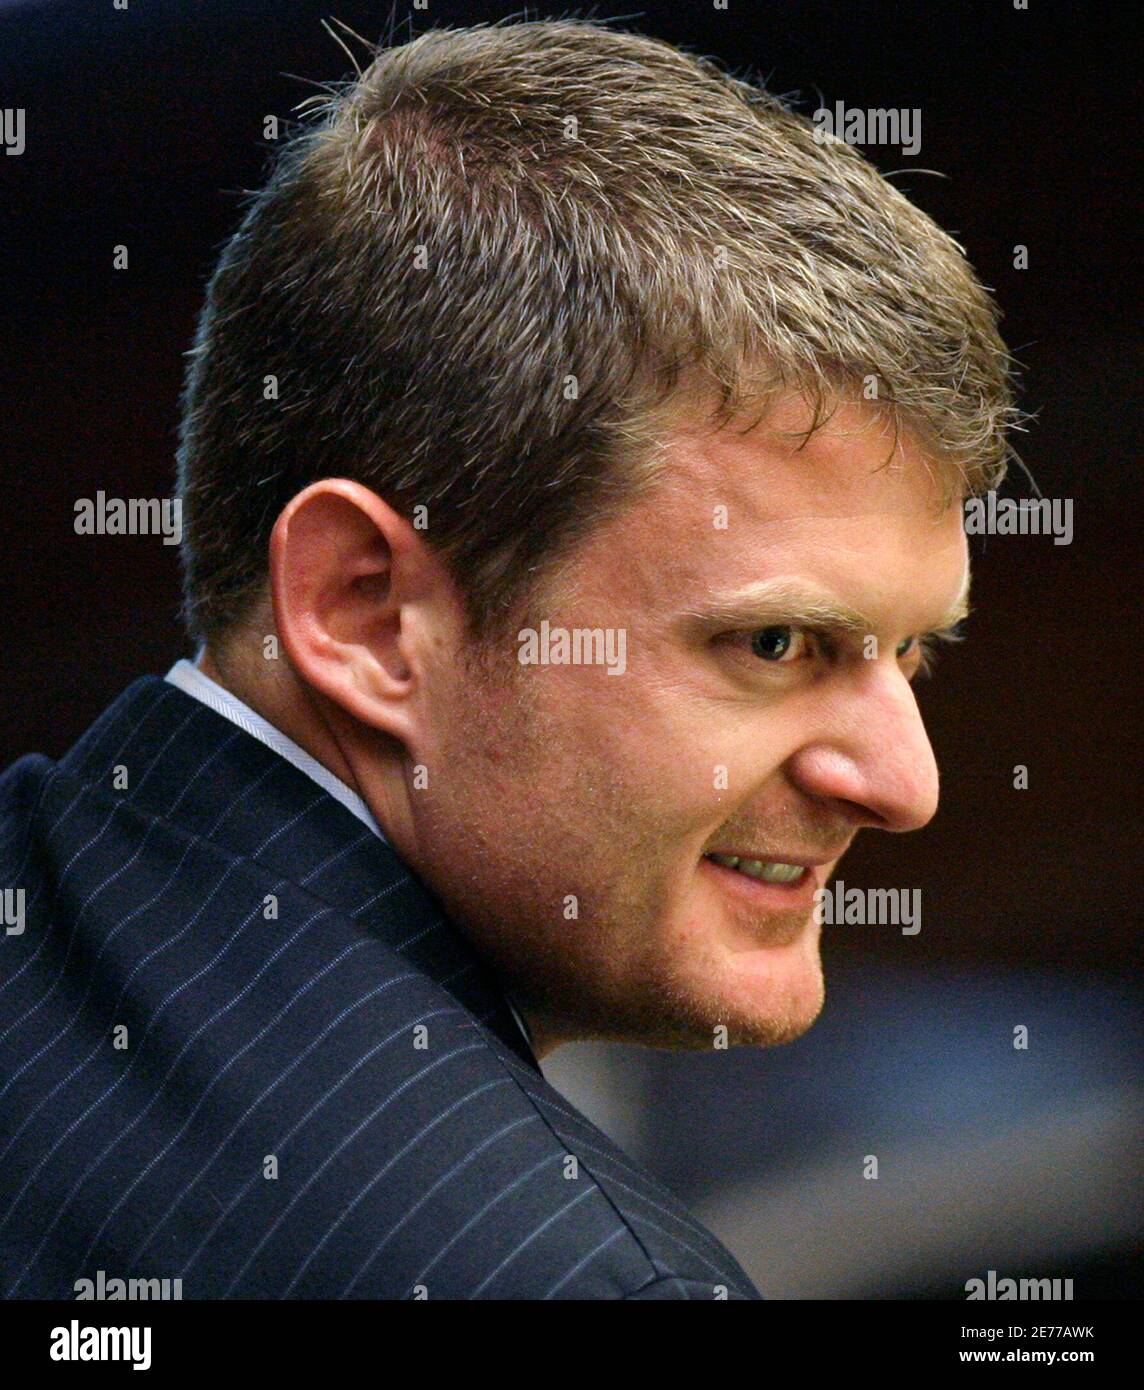 U.S. cyclist Floyd Landis looks to one of his attorneys at an arbitration hearing in Malibu, California May 21, 2007. The arbitrators are considering a case brought against Landis by the U.S. Anti-Doping Agency alleging the cyclist used illicit performance-enhancing drugs. He faces a possible two-year suspension and loss of his Tour de France title. REUTERS/Danny Moloshok (UNITED STATES) Stock Photo